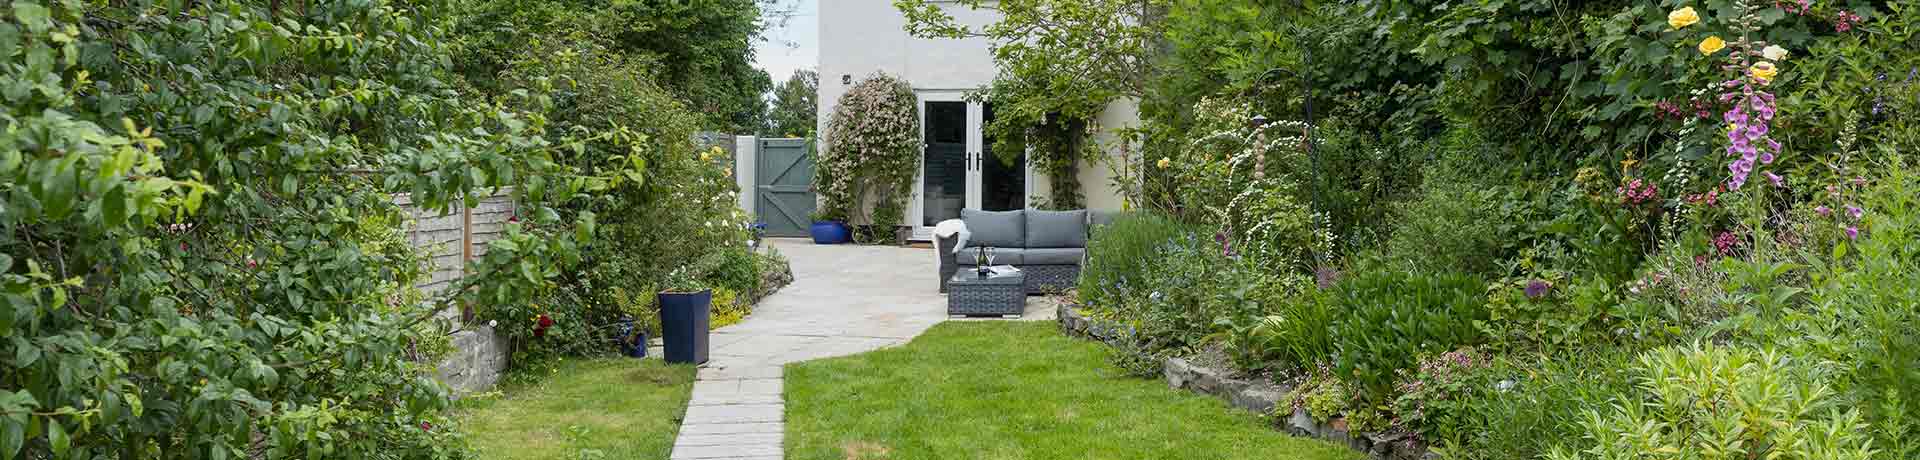 Dog friendly cottages in North England with an enclosed garden.